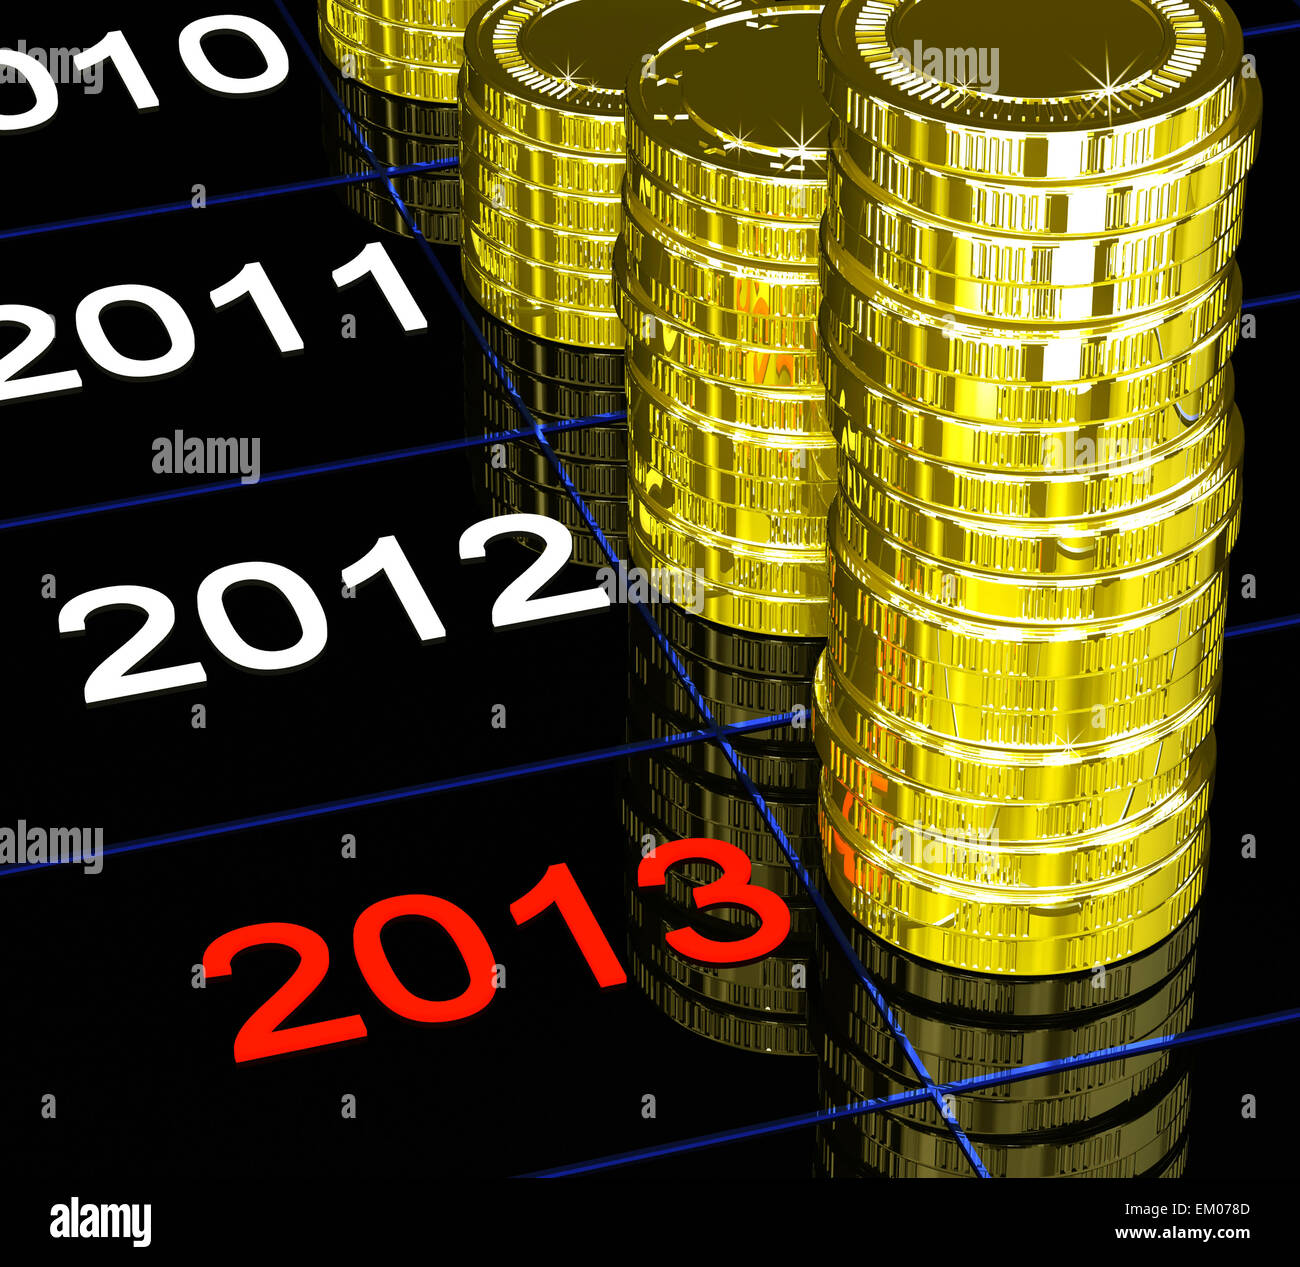 Coins On 2013 Showing Current Monetary Status Stock Photo